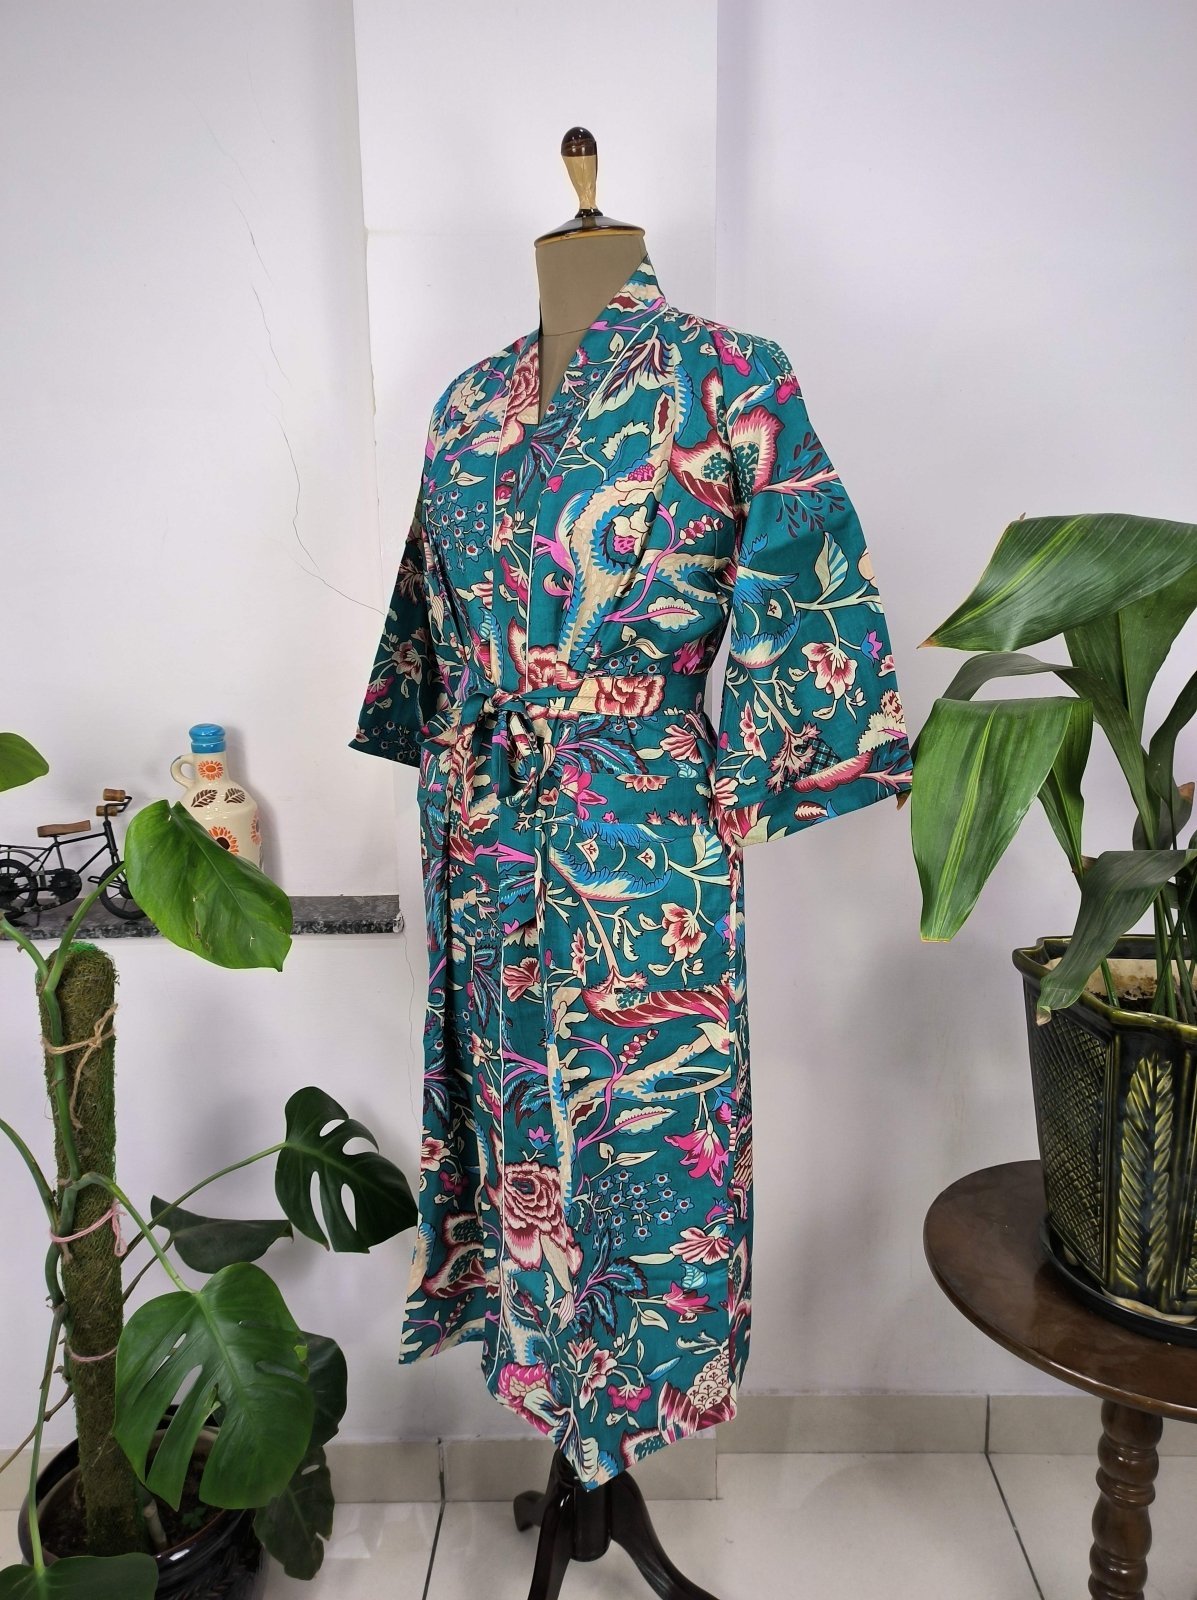 Boho House Robe Indian Handprinted Cotton Kimono Aquatic Green Florals | Perfect Summer Luxury Beach Holidays Yacht Cover Up Stunning Dress - The Eastern Loom